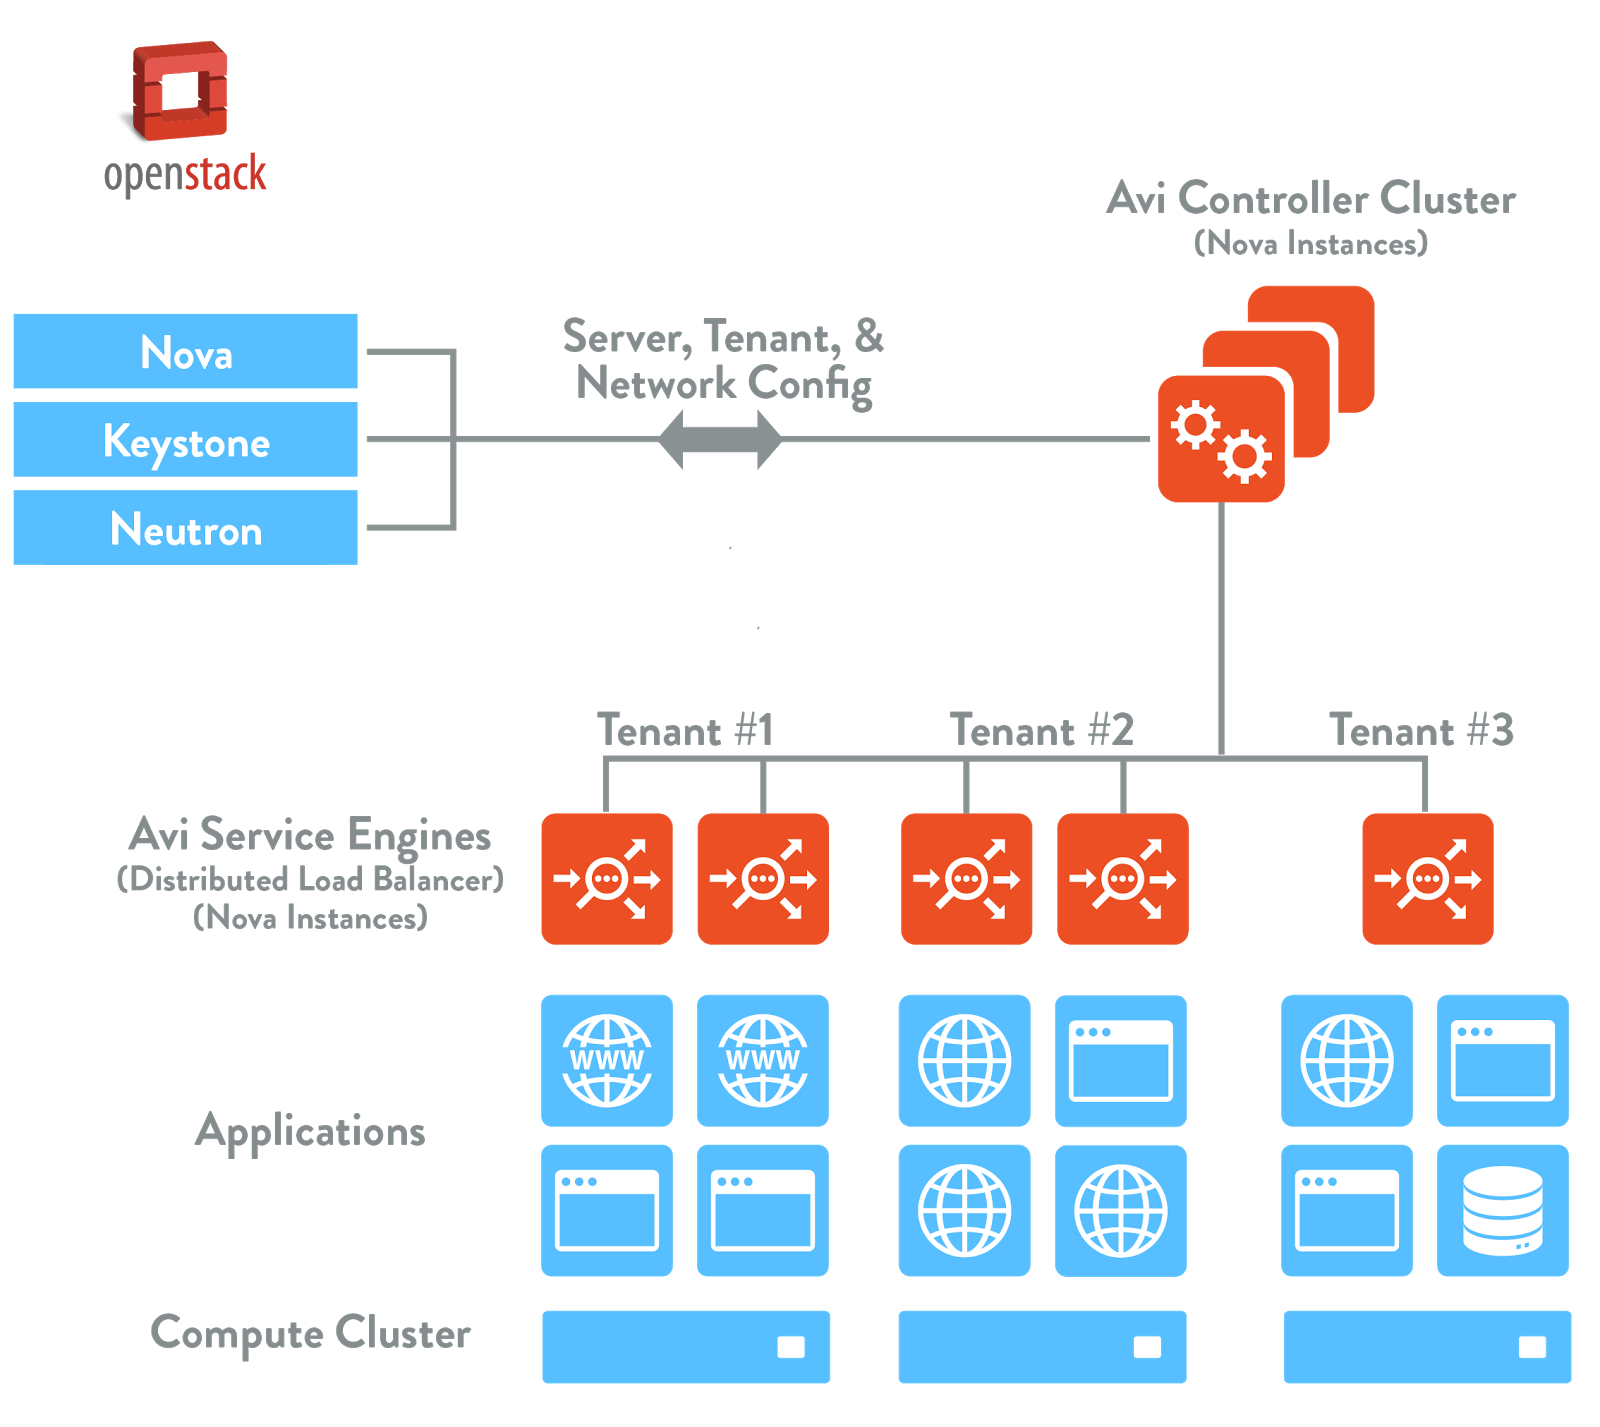 OpenStack deployment with Avi Vantage reference architecture